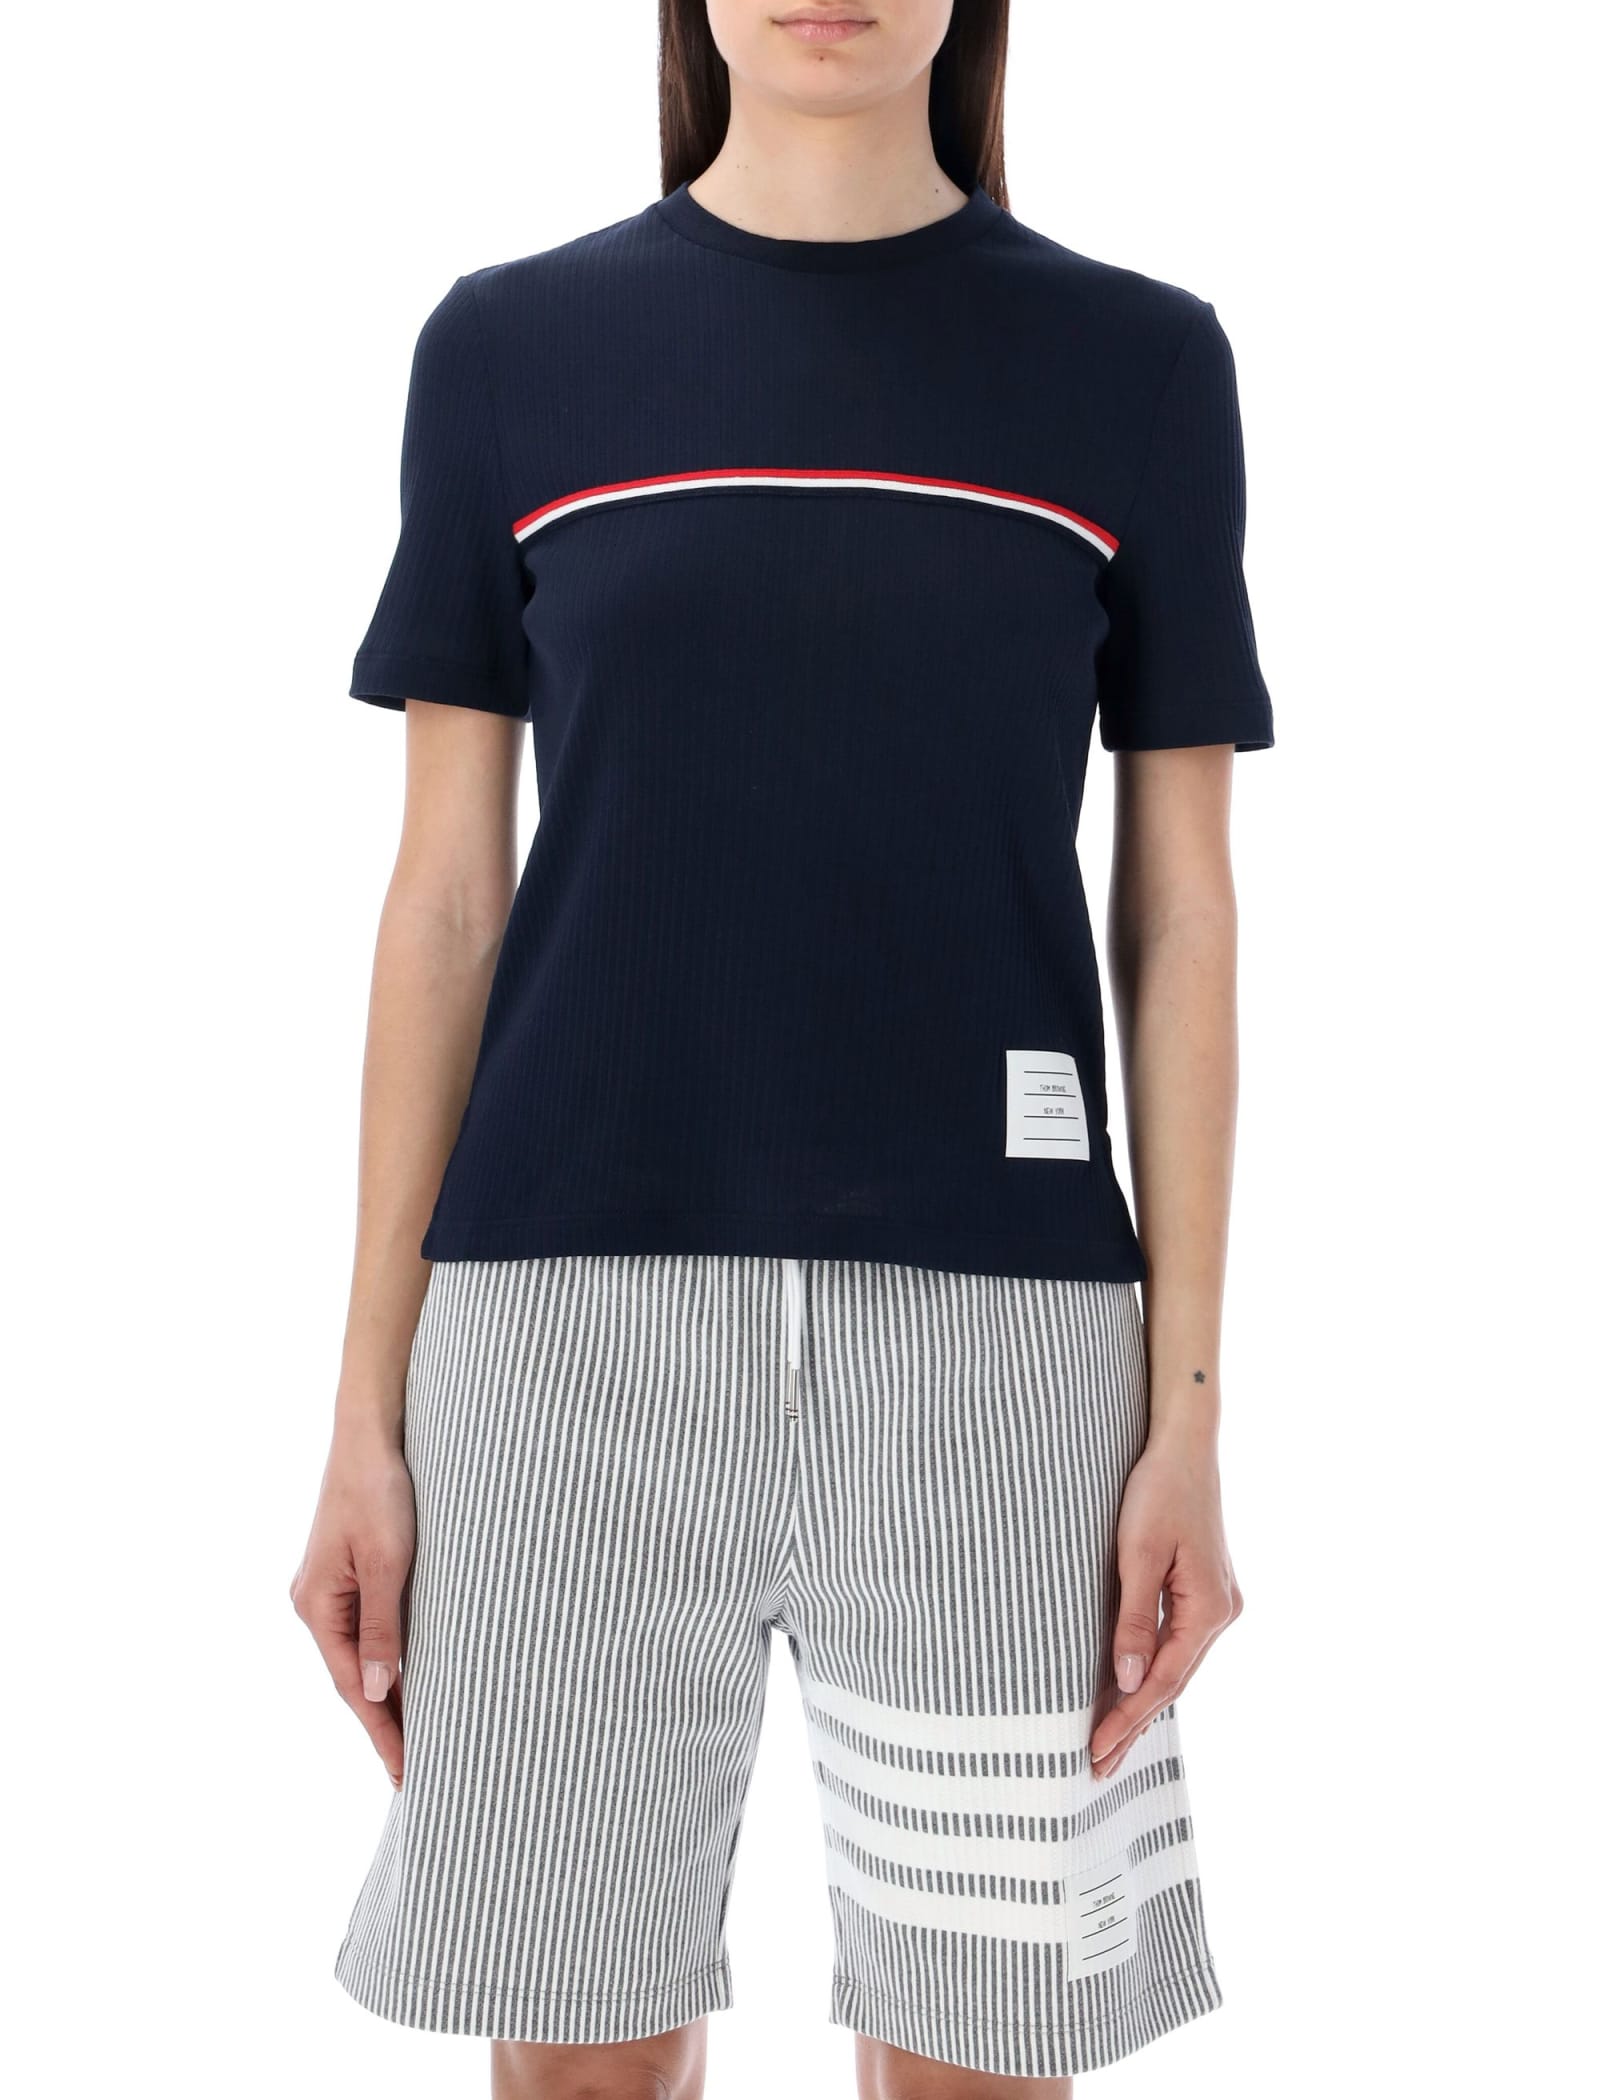 Thom Browne S/s With Red/white And Blue Stripes In Navy | ModeSens